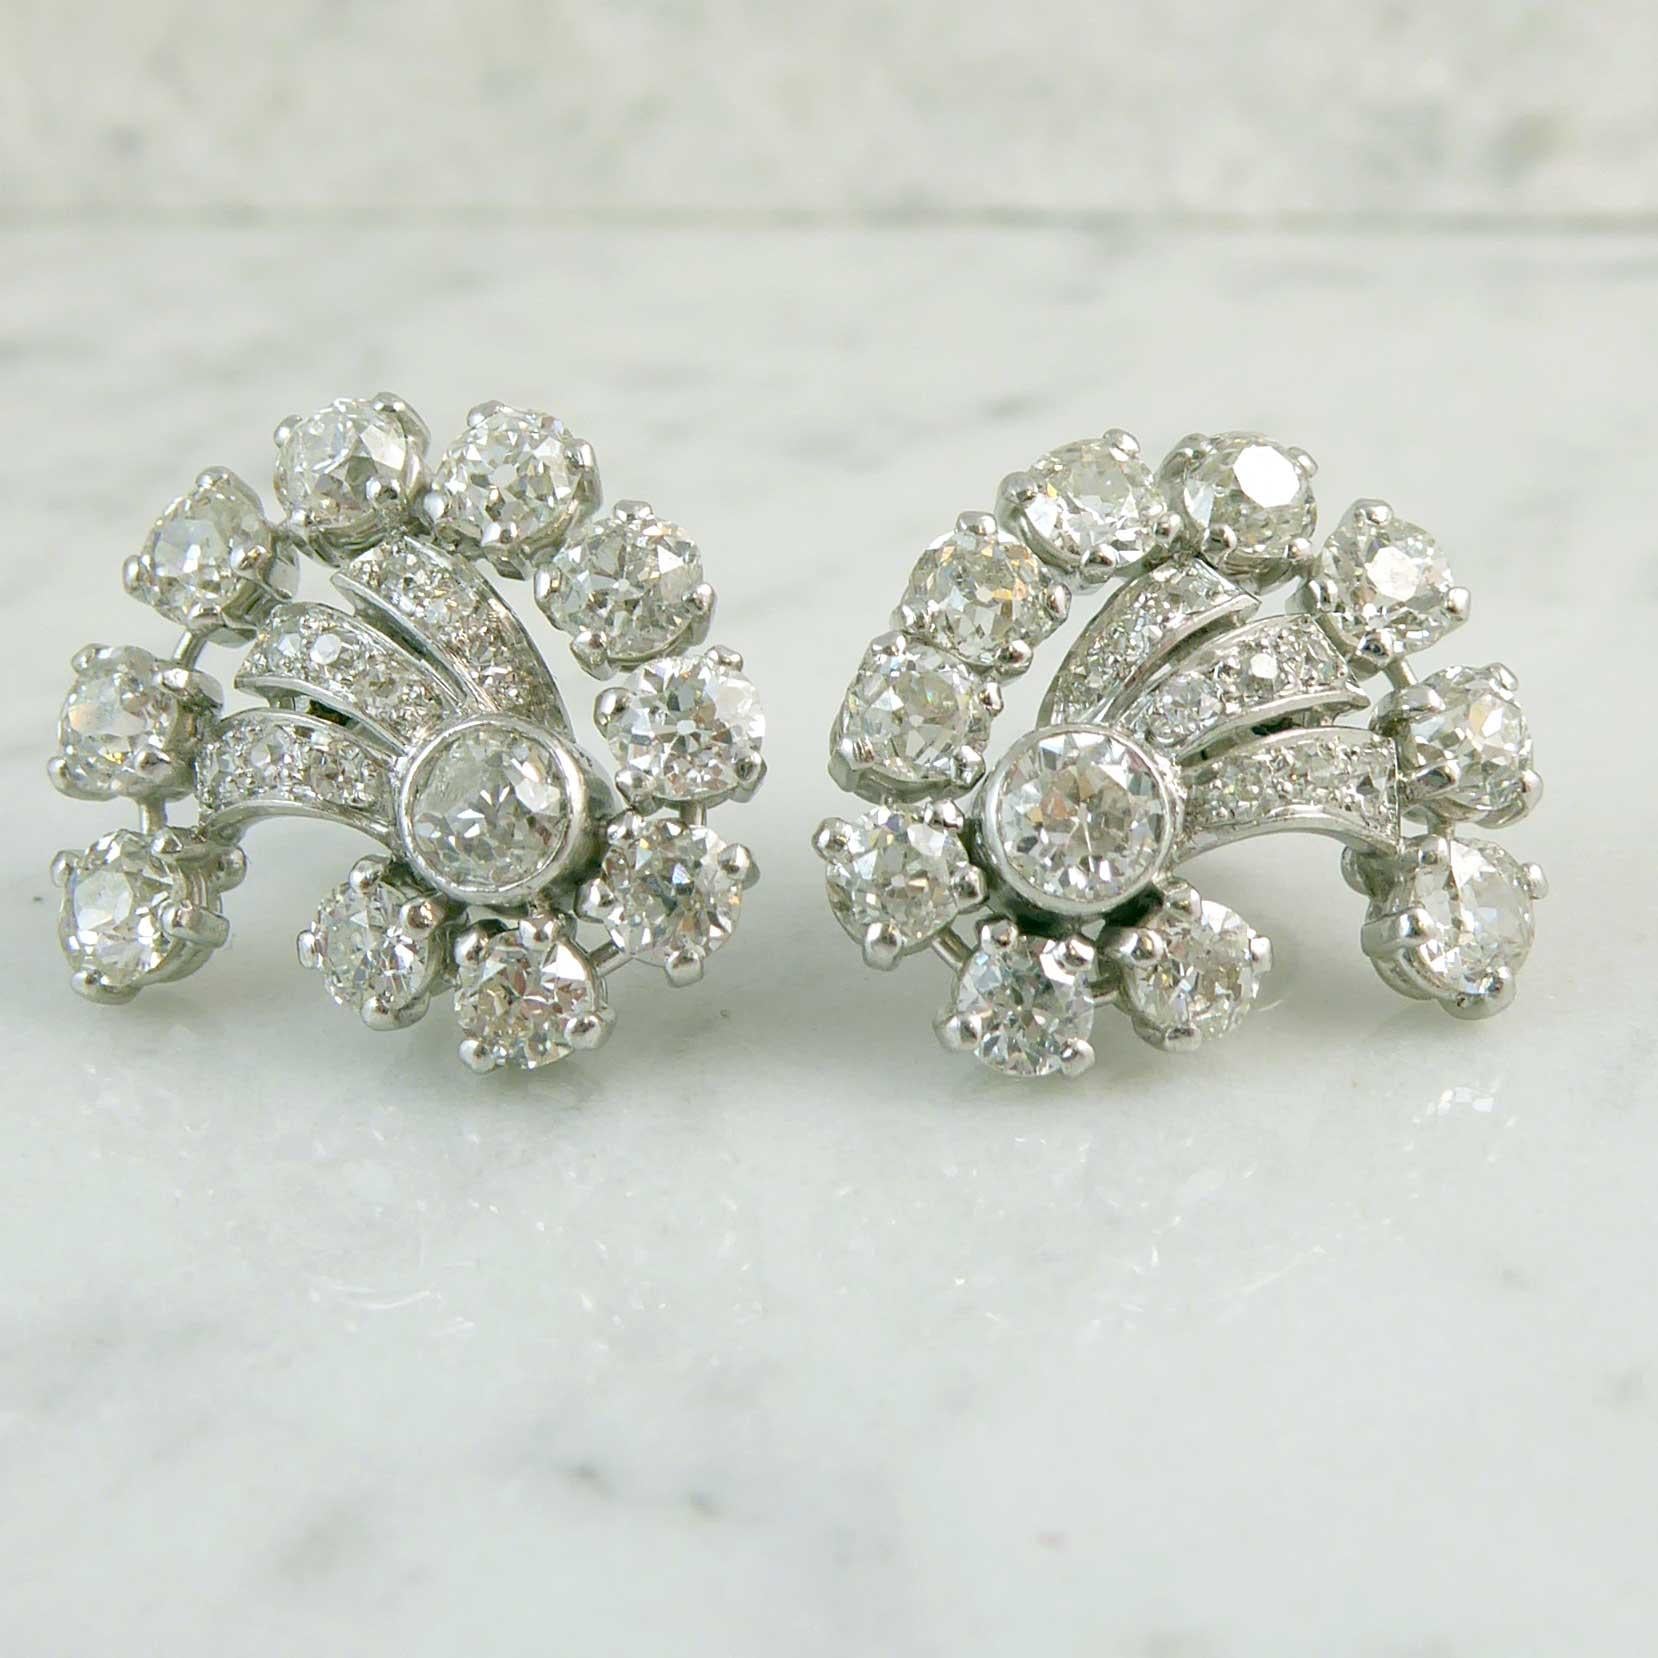 Vintage 3.74 Carat Old European Cut Diamond Earrings, 1950s-1960s Cluster Stud In Excellent Condition In Yorkshire, West Yorkshire